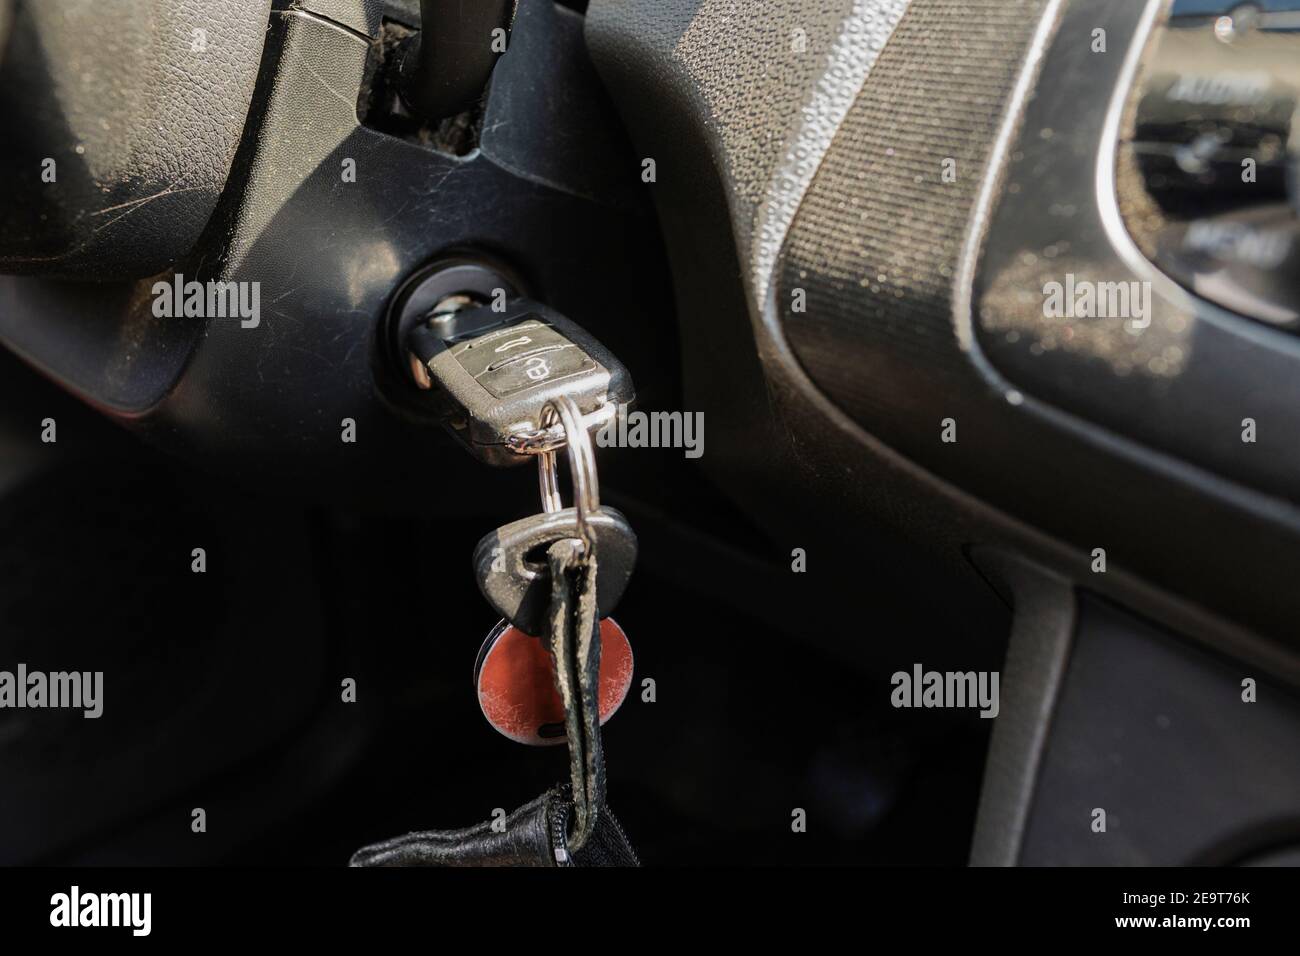 Ignition key in ignition lock Stock Photo